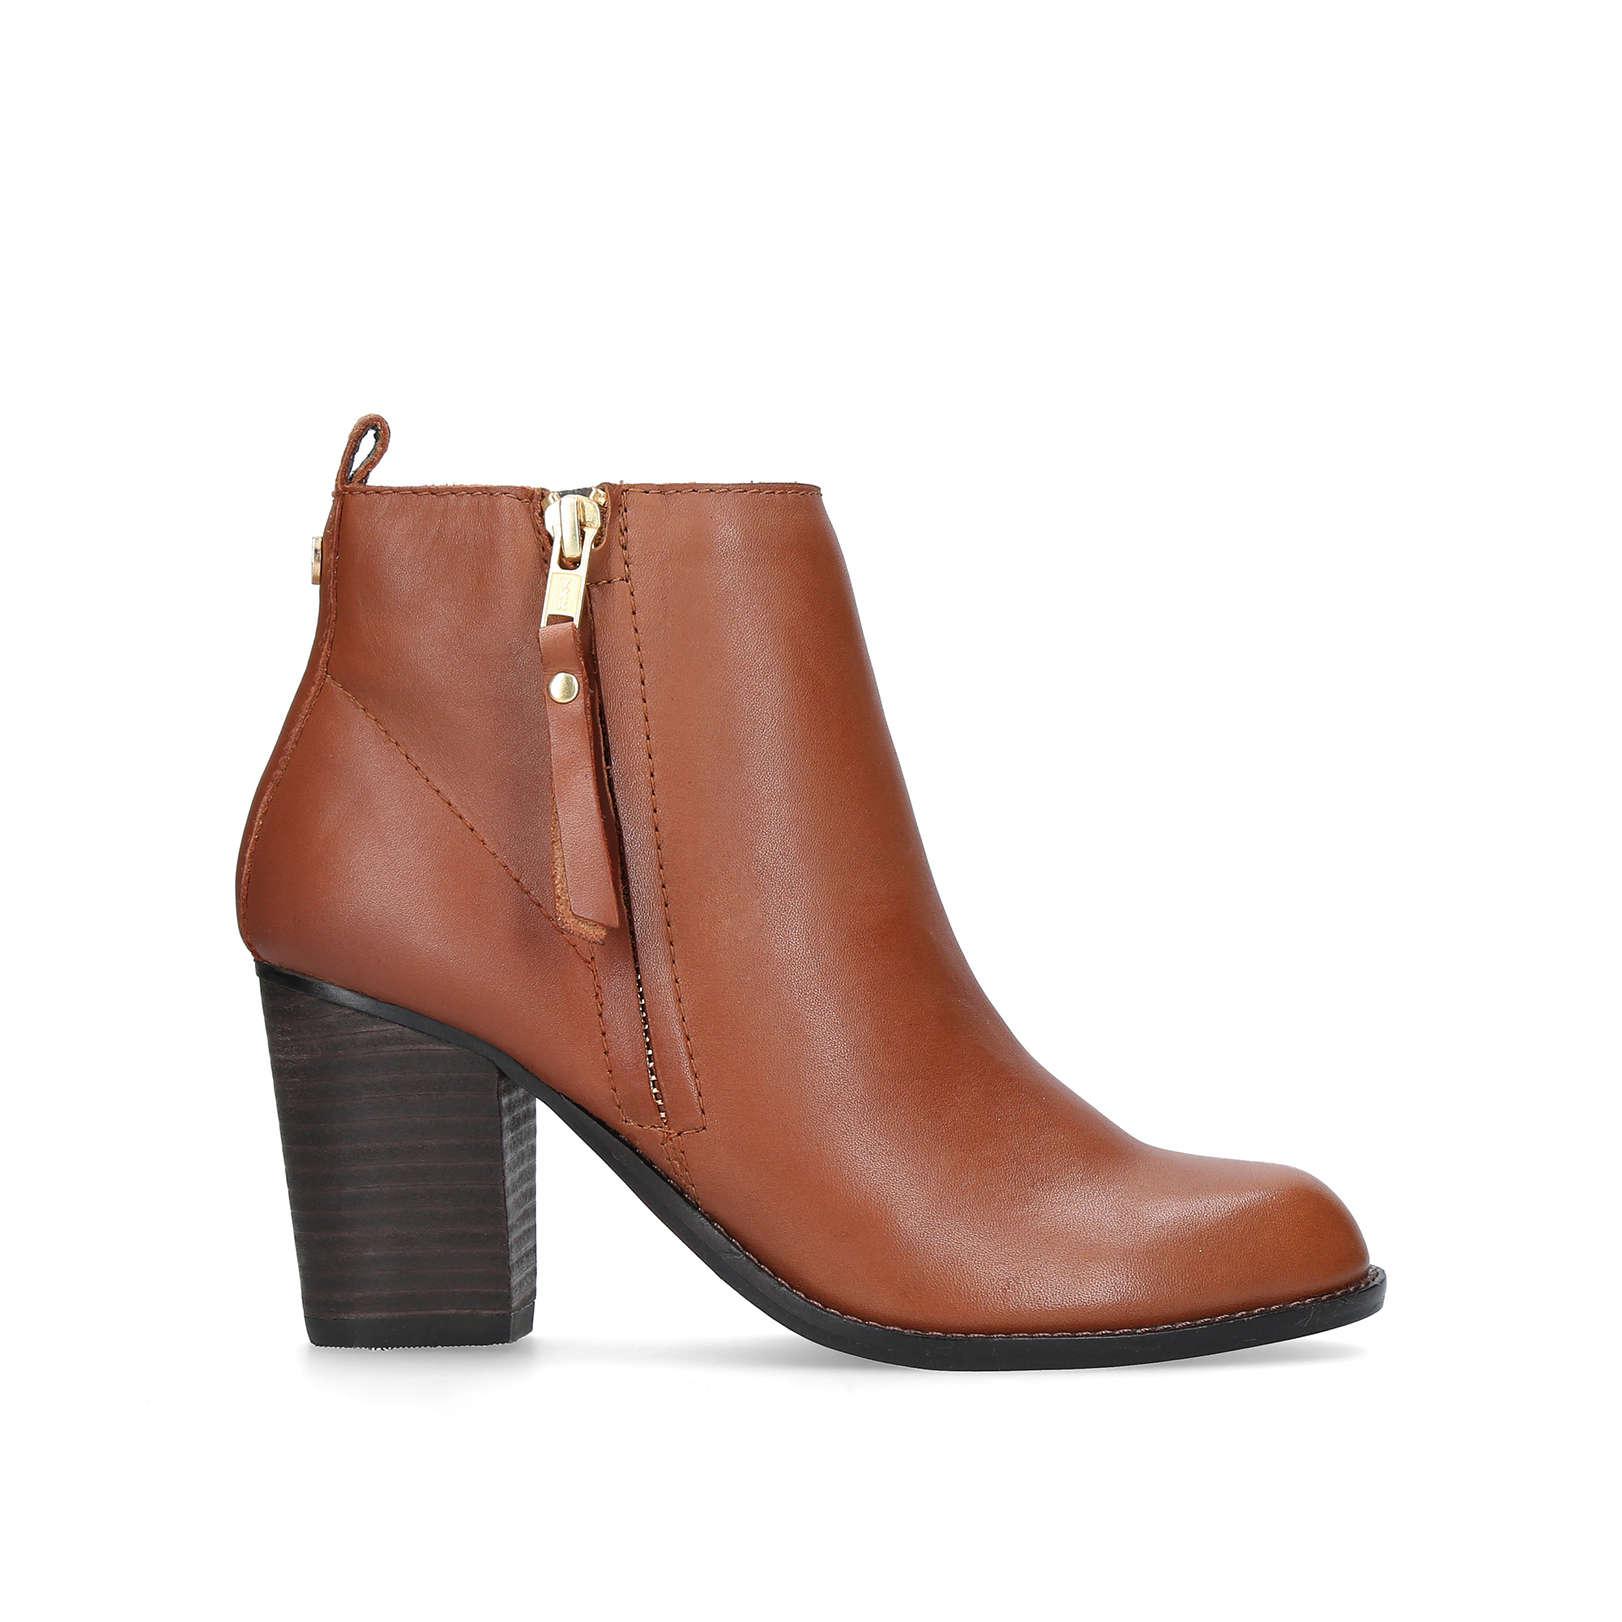 Carvela Kurt Geiger Leather Tanga Block Heeled Ankle Boots in Brown - Lyst